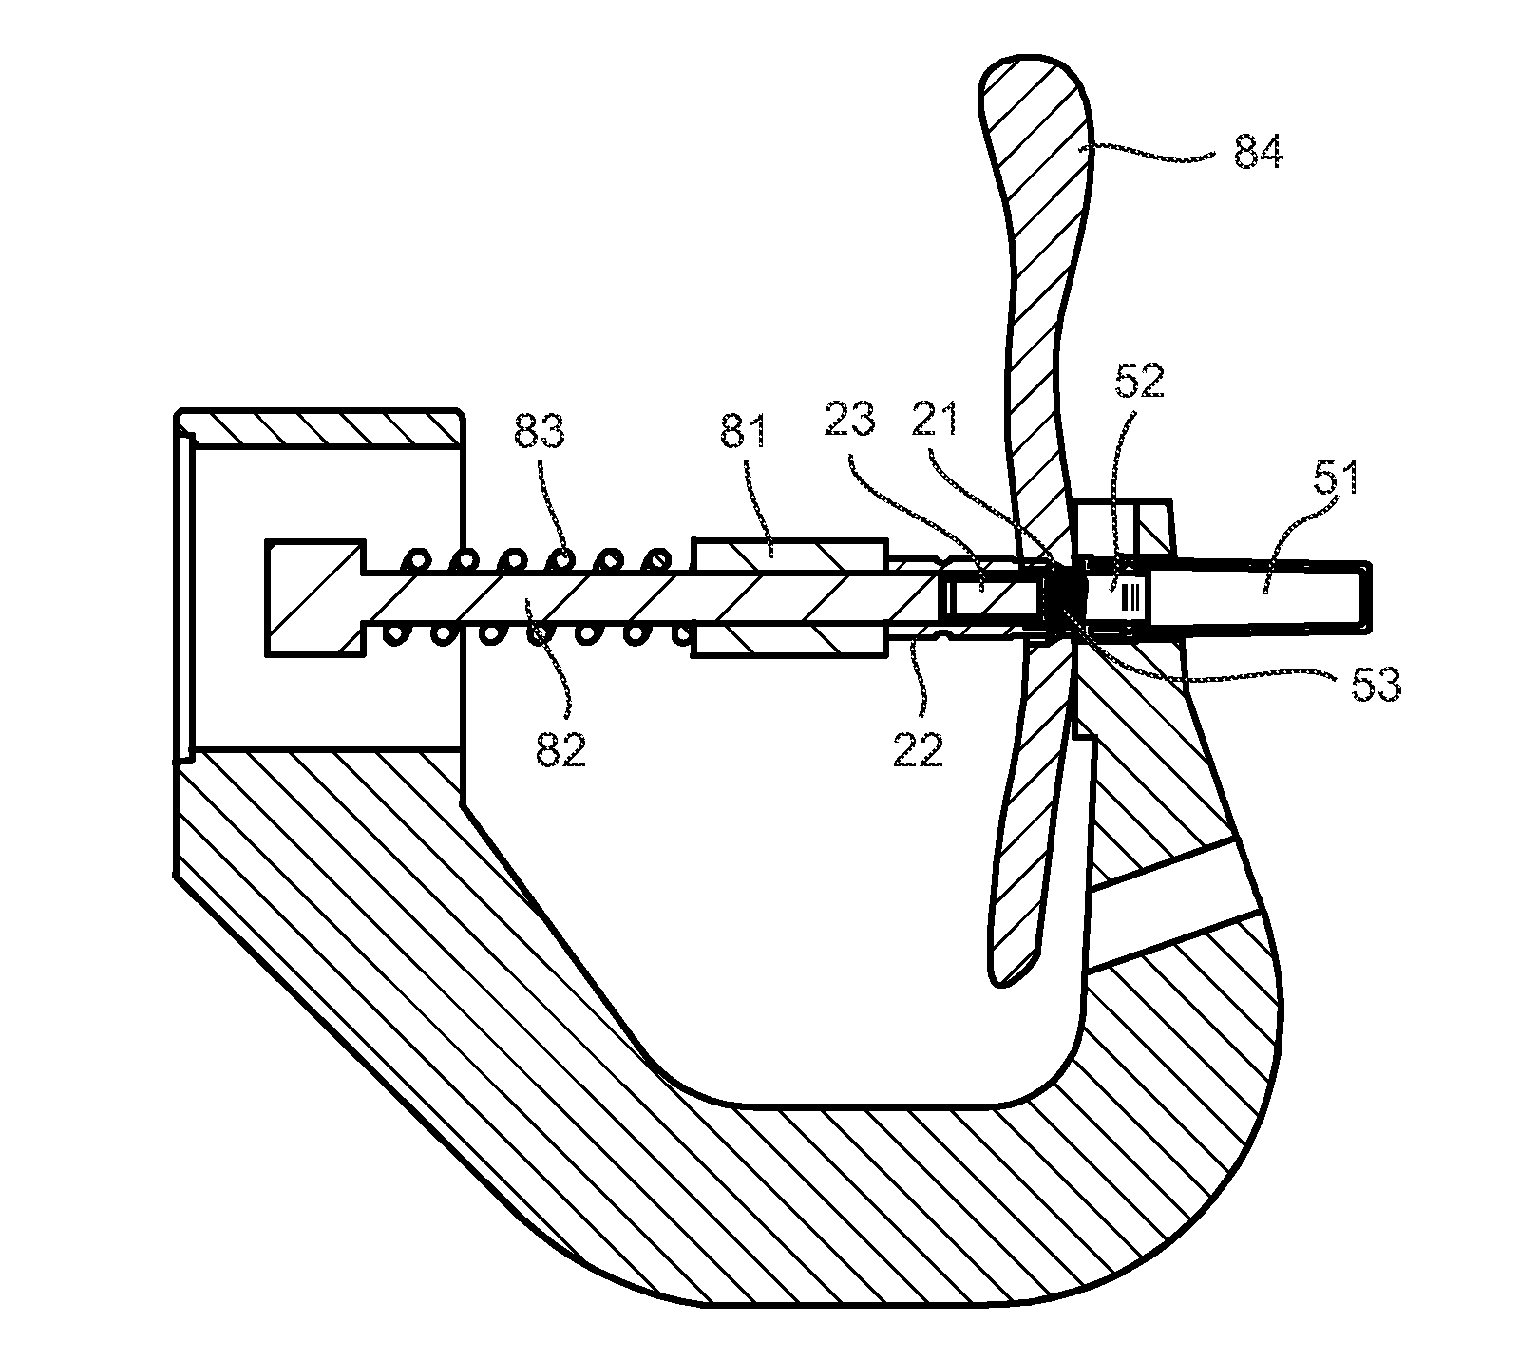 Device for collecting a tissue sample from an animal